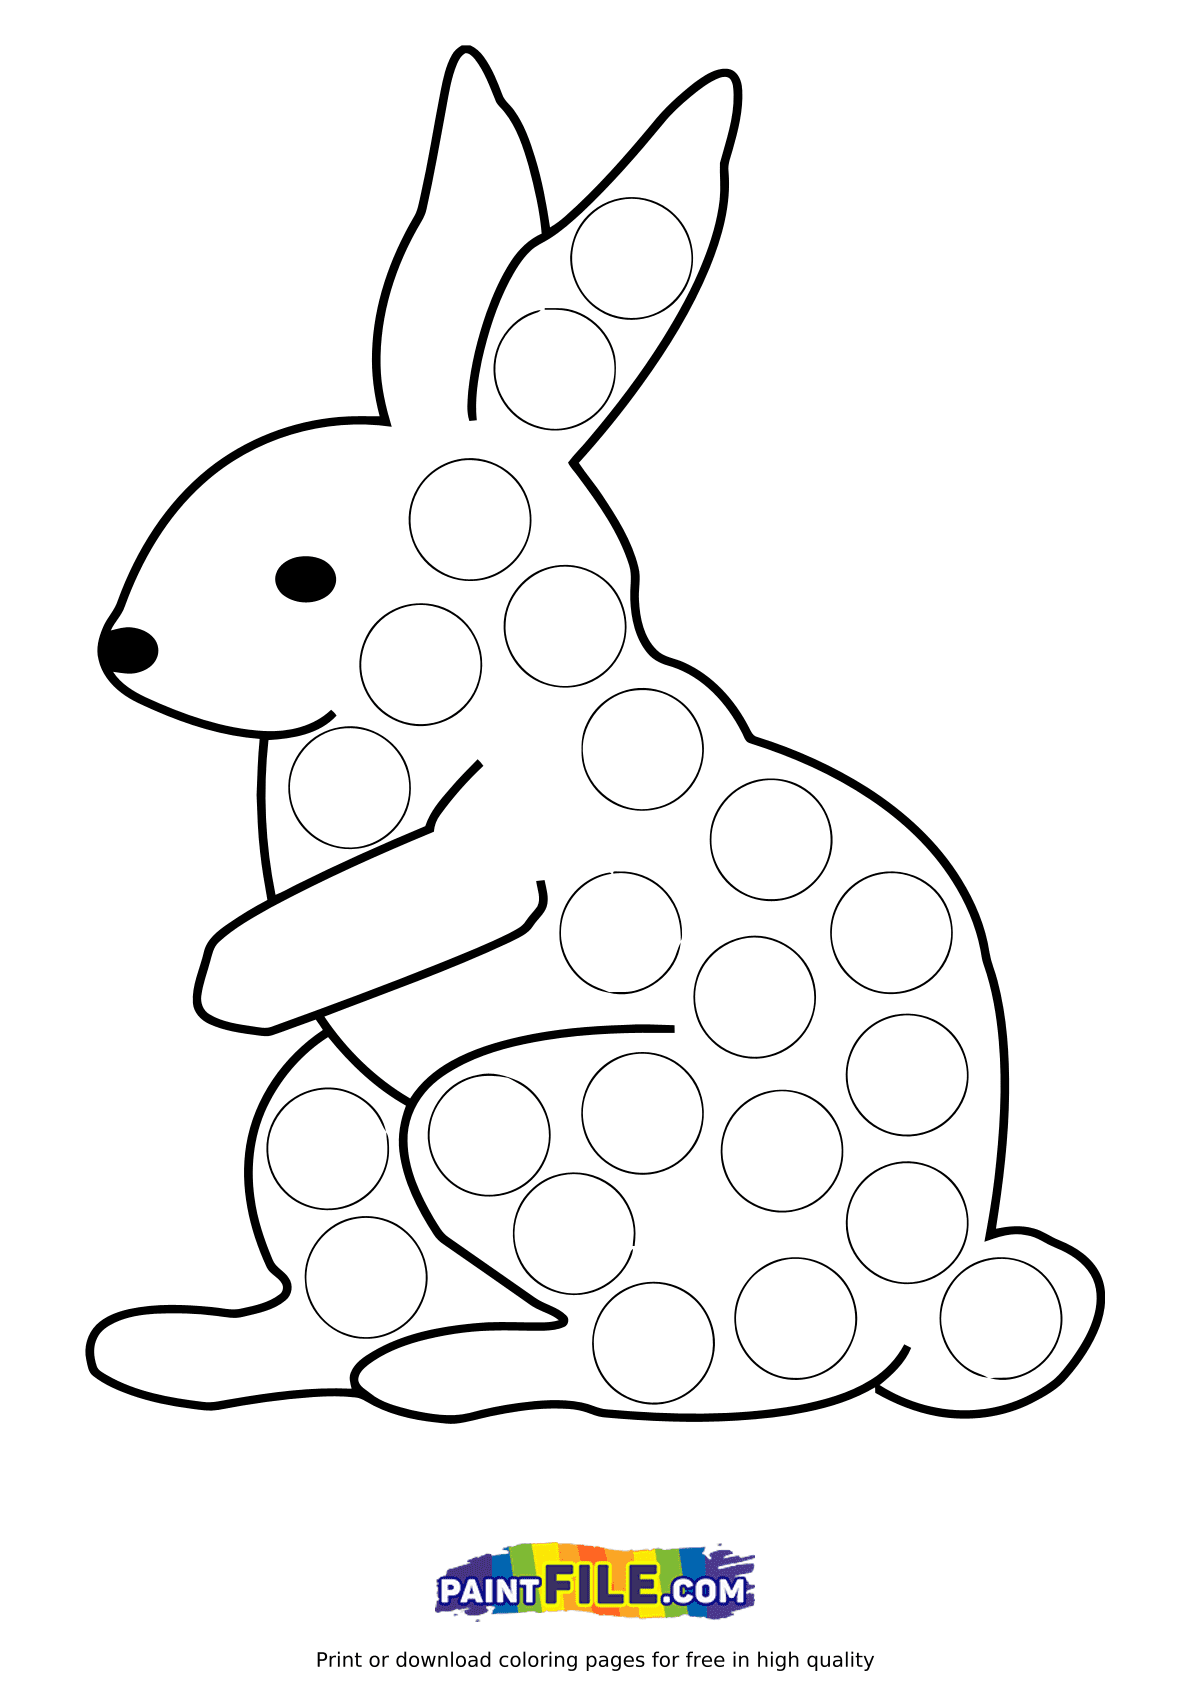 Pop it Forest Bunny Coloring Page